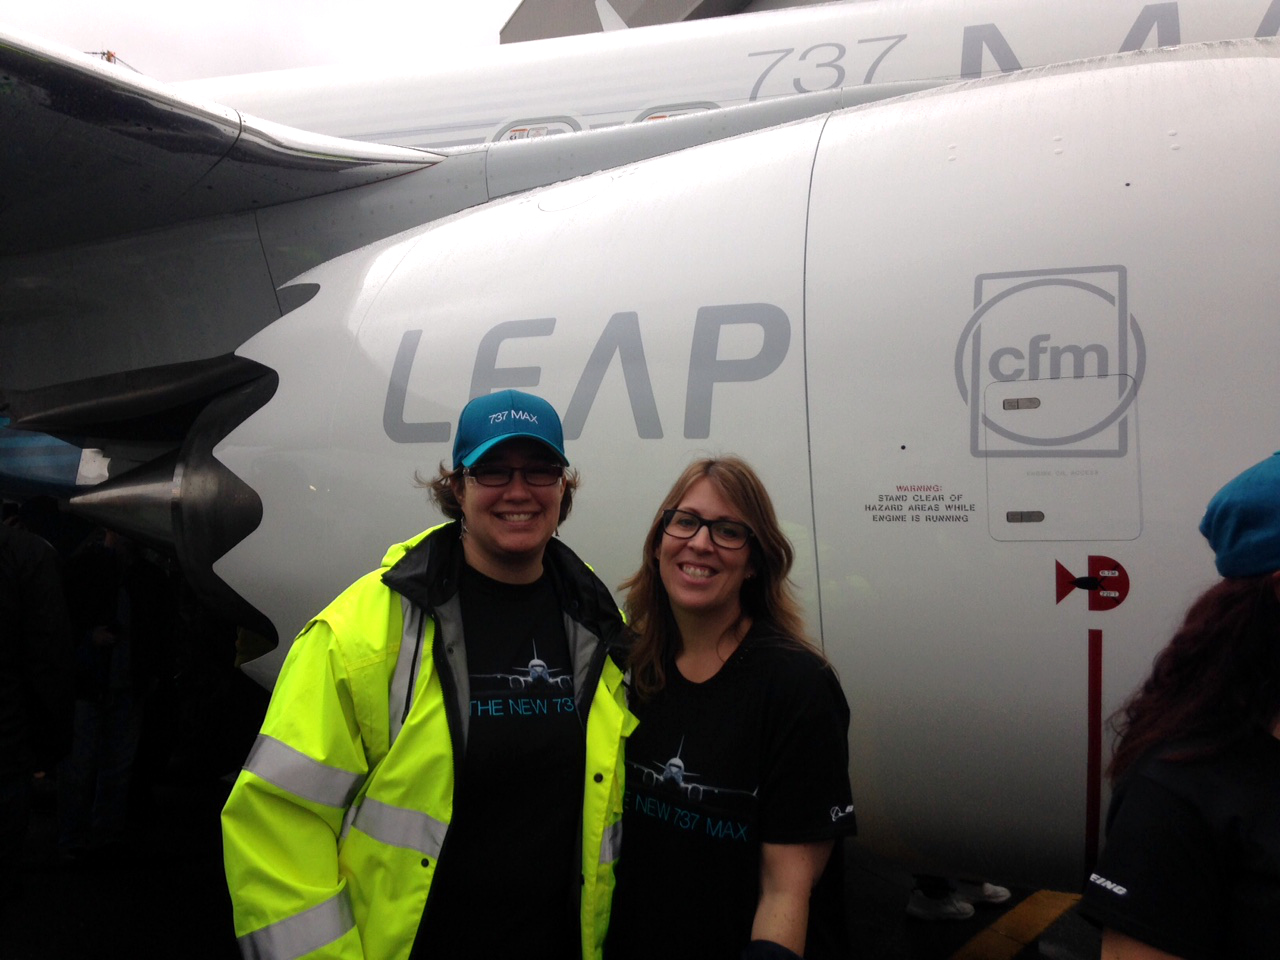 Cristina (right) and a GE field service engineer who is working in Seattle on the LEAP program. Image: